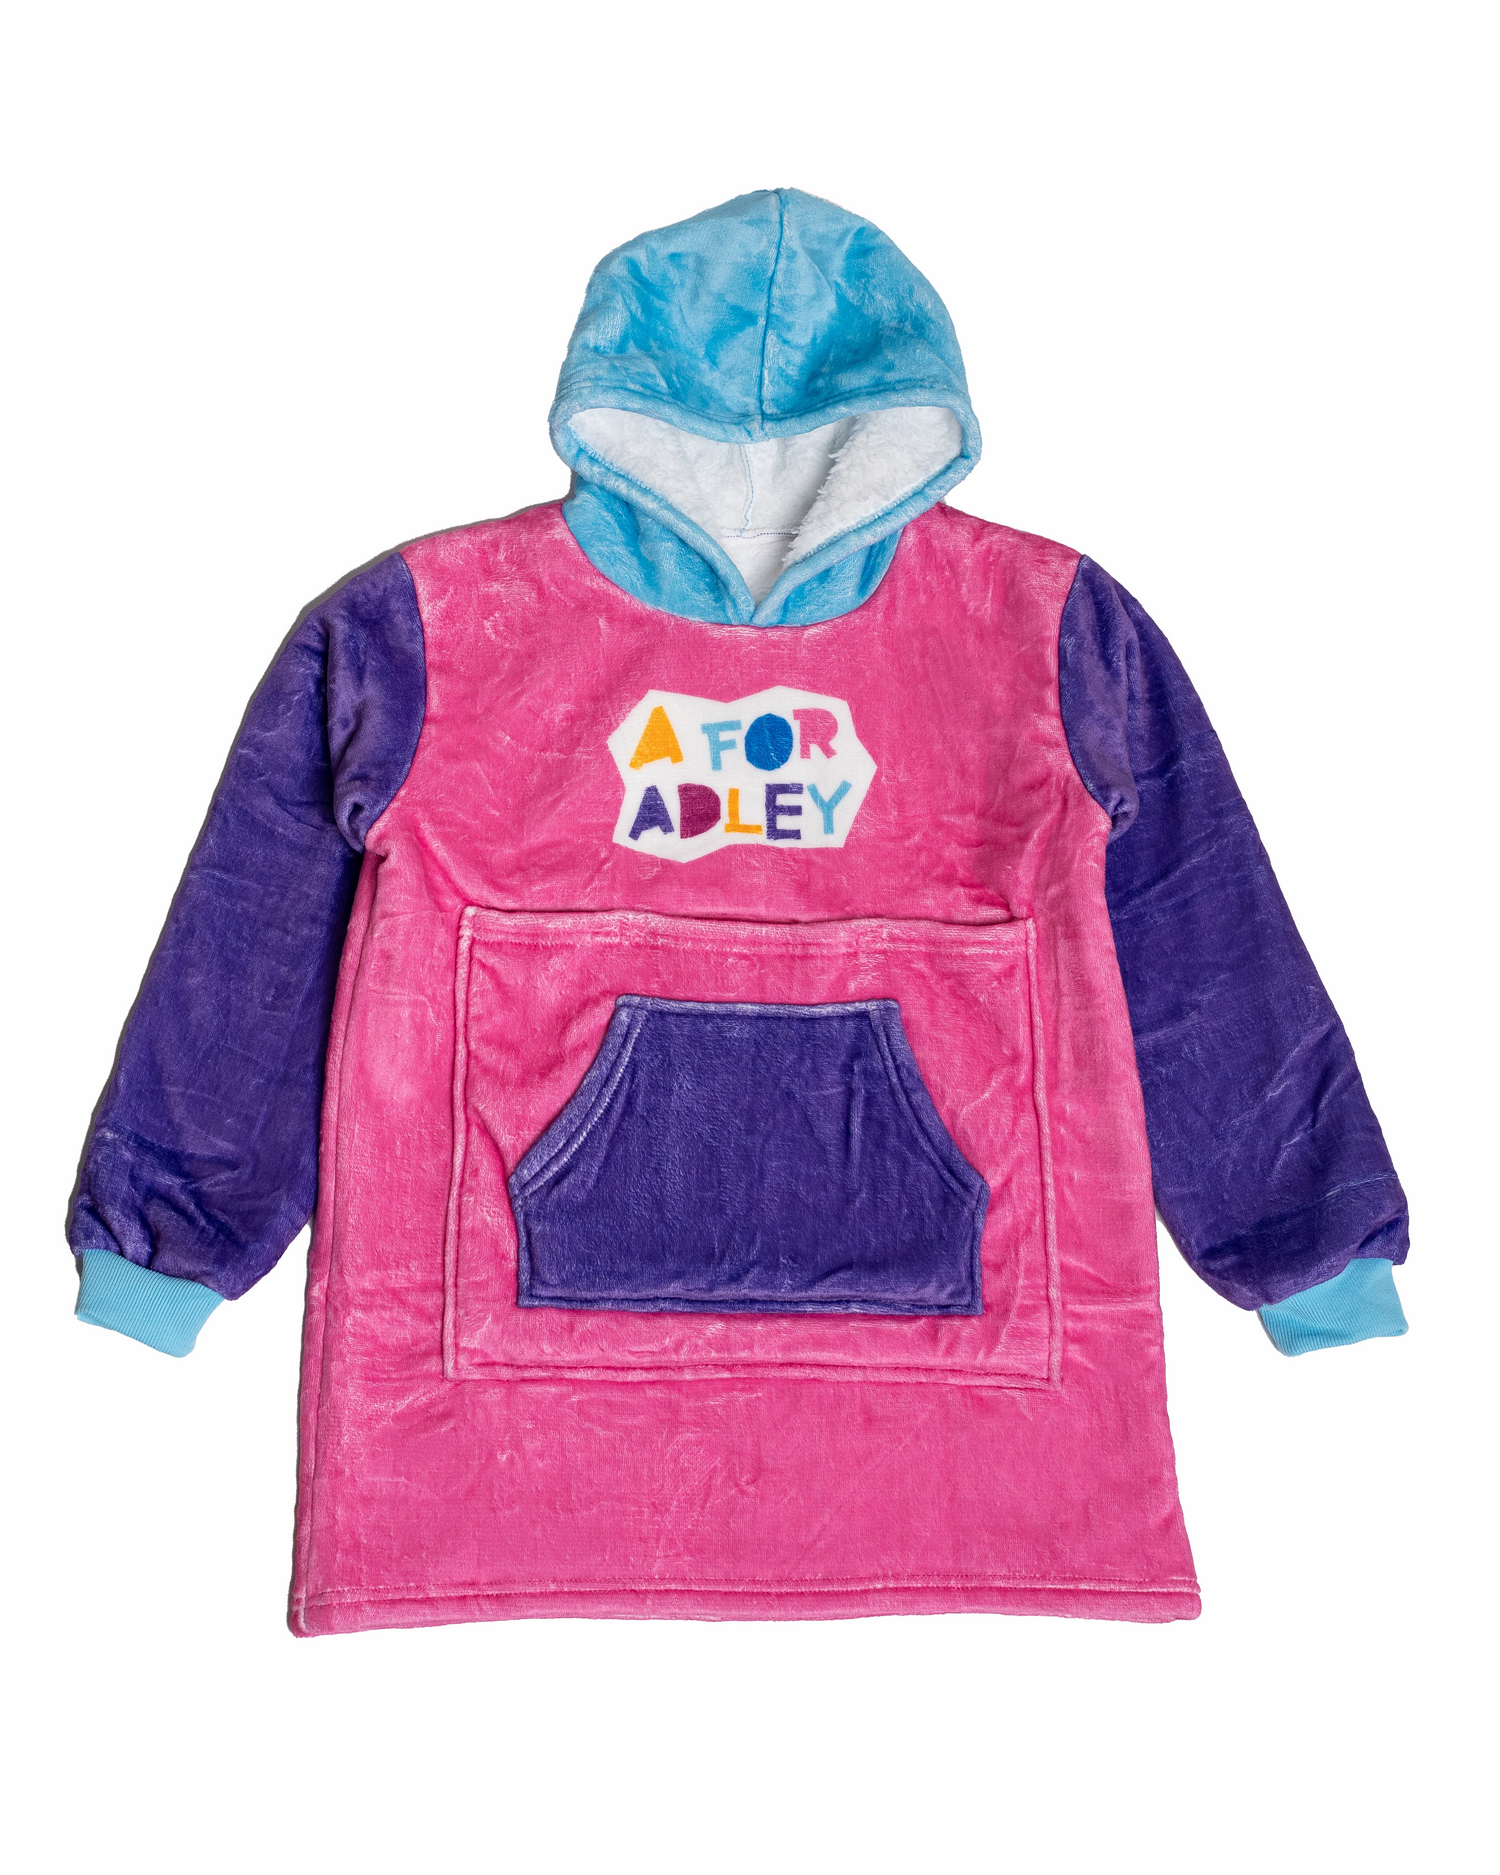 A for Adley Ipad Holding Blanket Hoodie